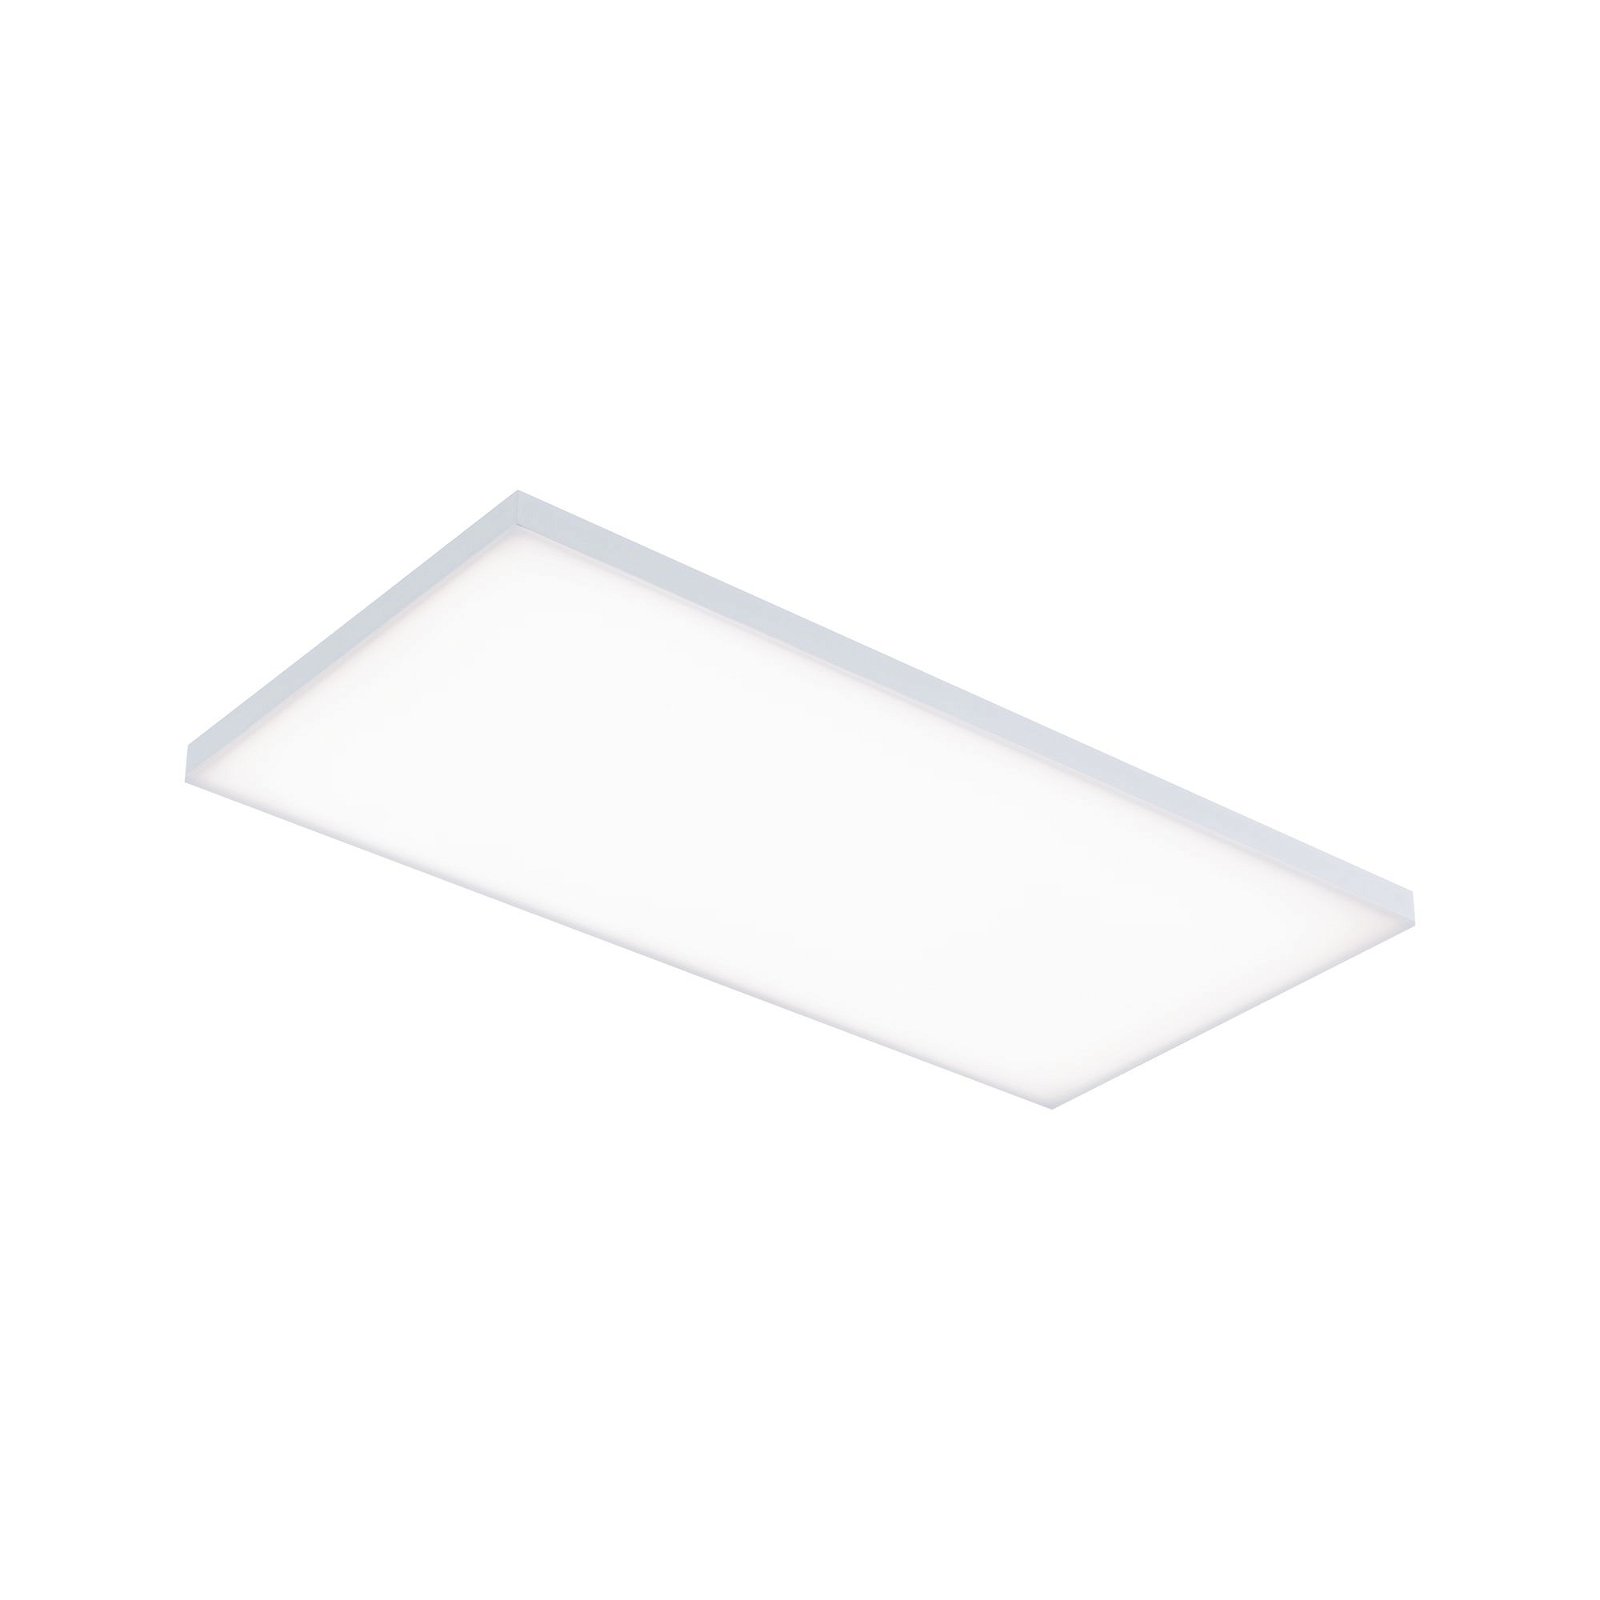 LED Panel Smart Home Zigbee 3.0 Velora square 595x295mm 15,5W 1600lm Tunable White Matt white dimmable